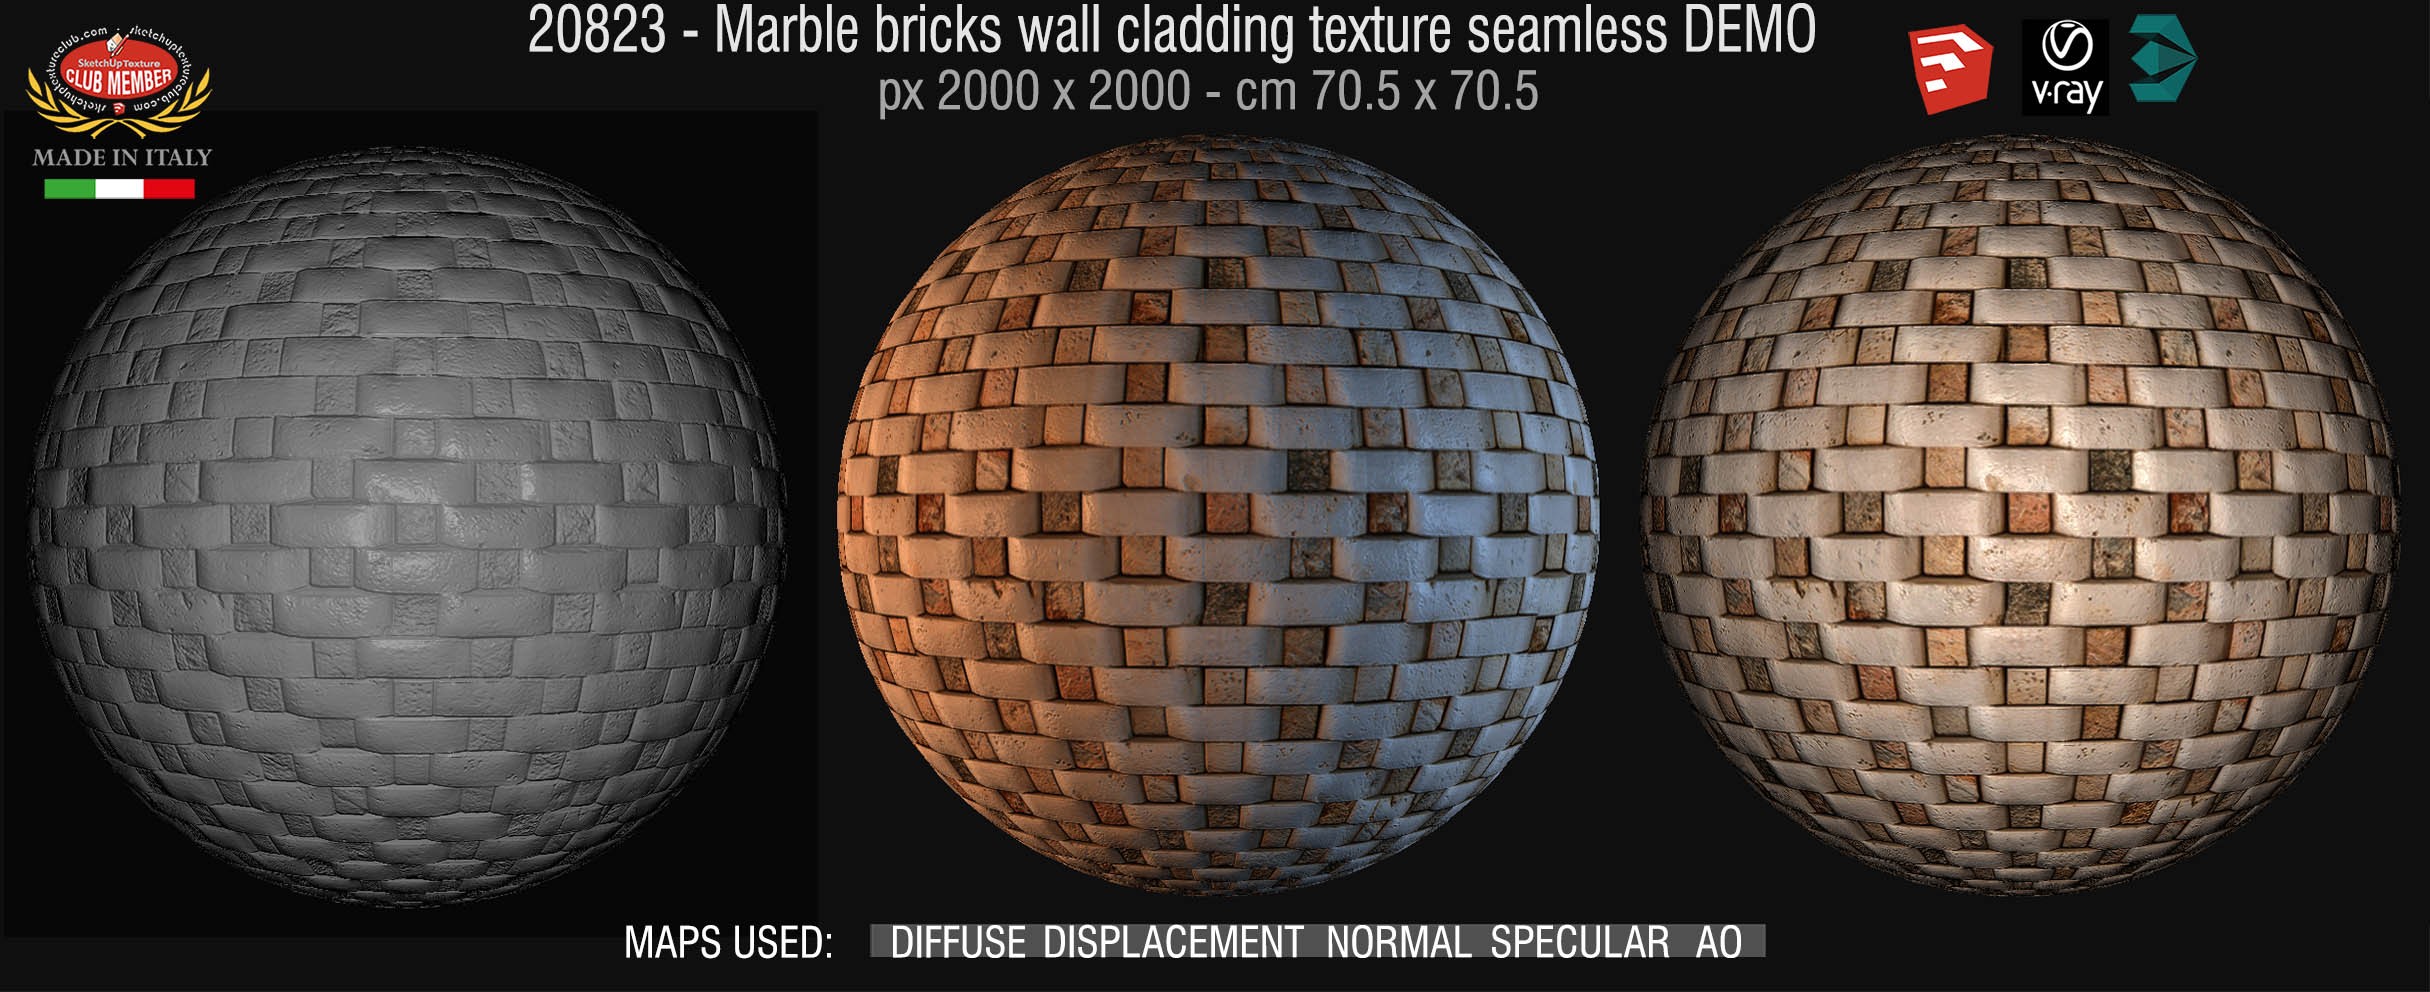 20823 Marble bricks wall cladding texture seamless and maps